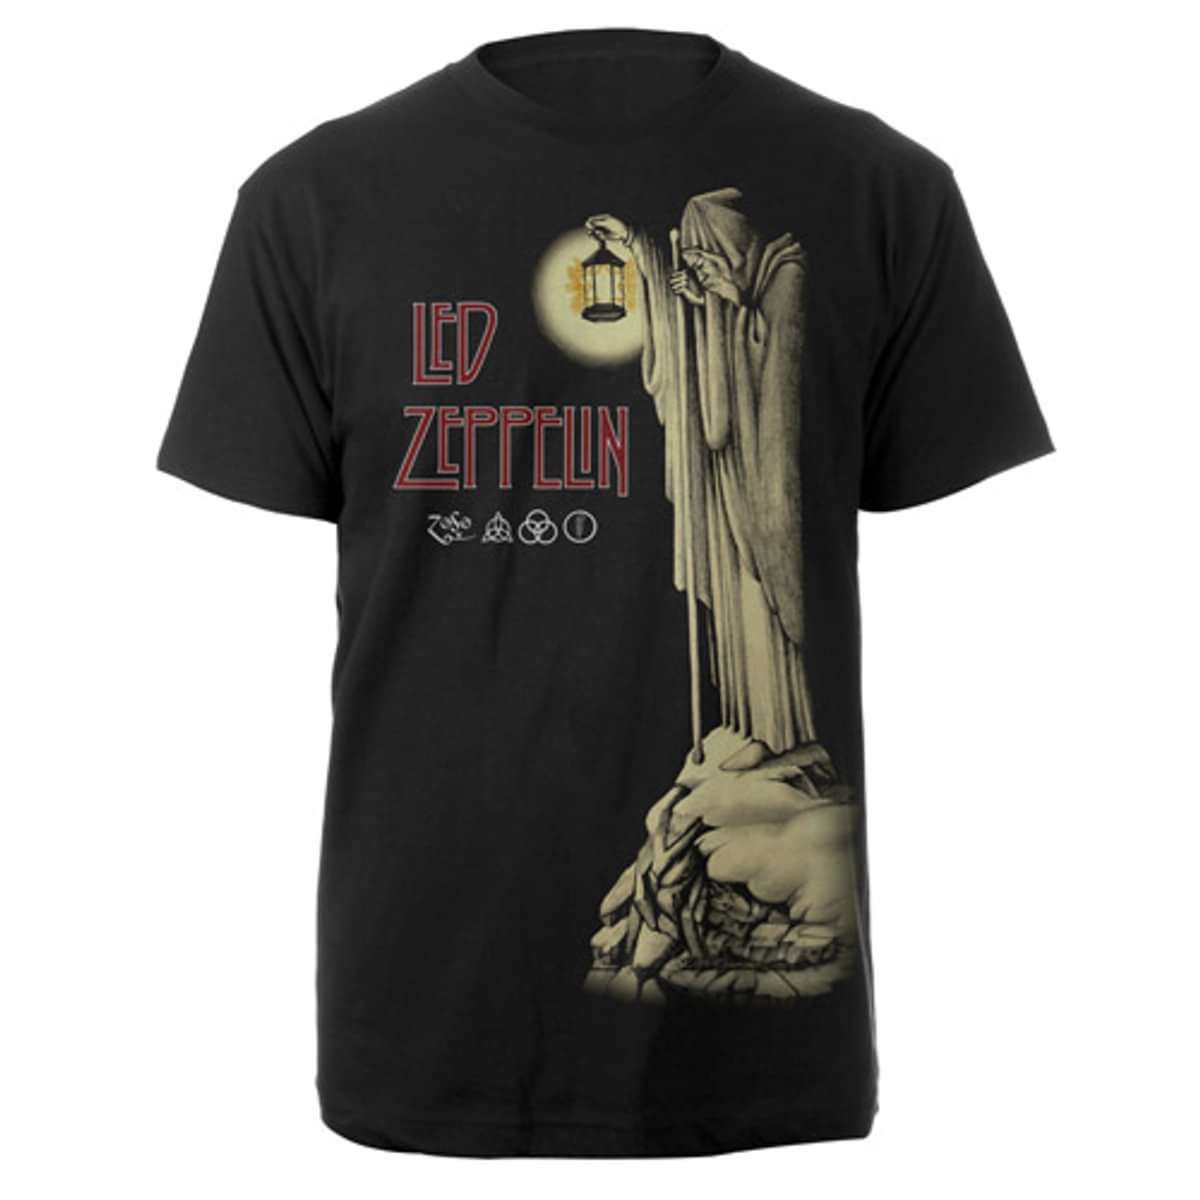 LED ZEPPELIN T Shirt Hermit Mens New Black Tee Page Plant All Size S M L XL XXL 